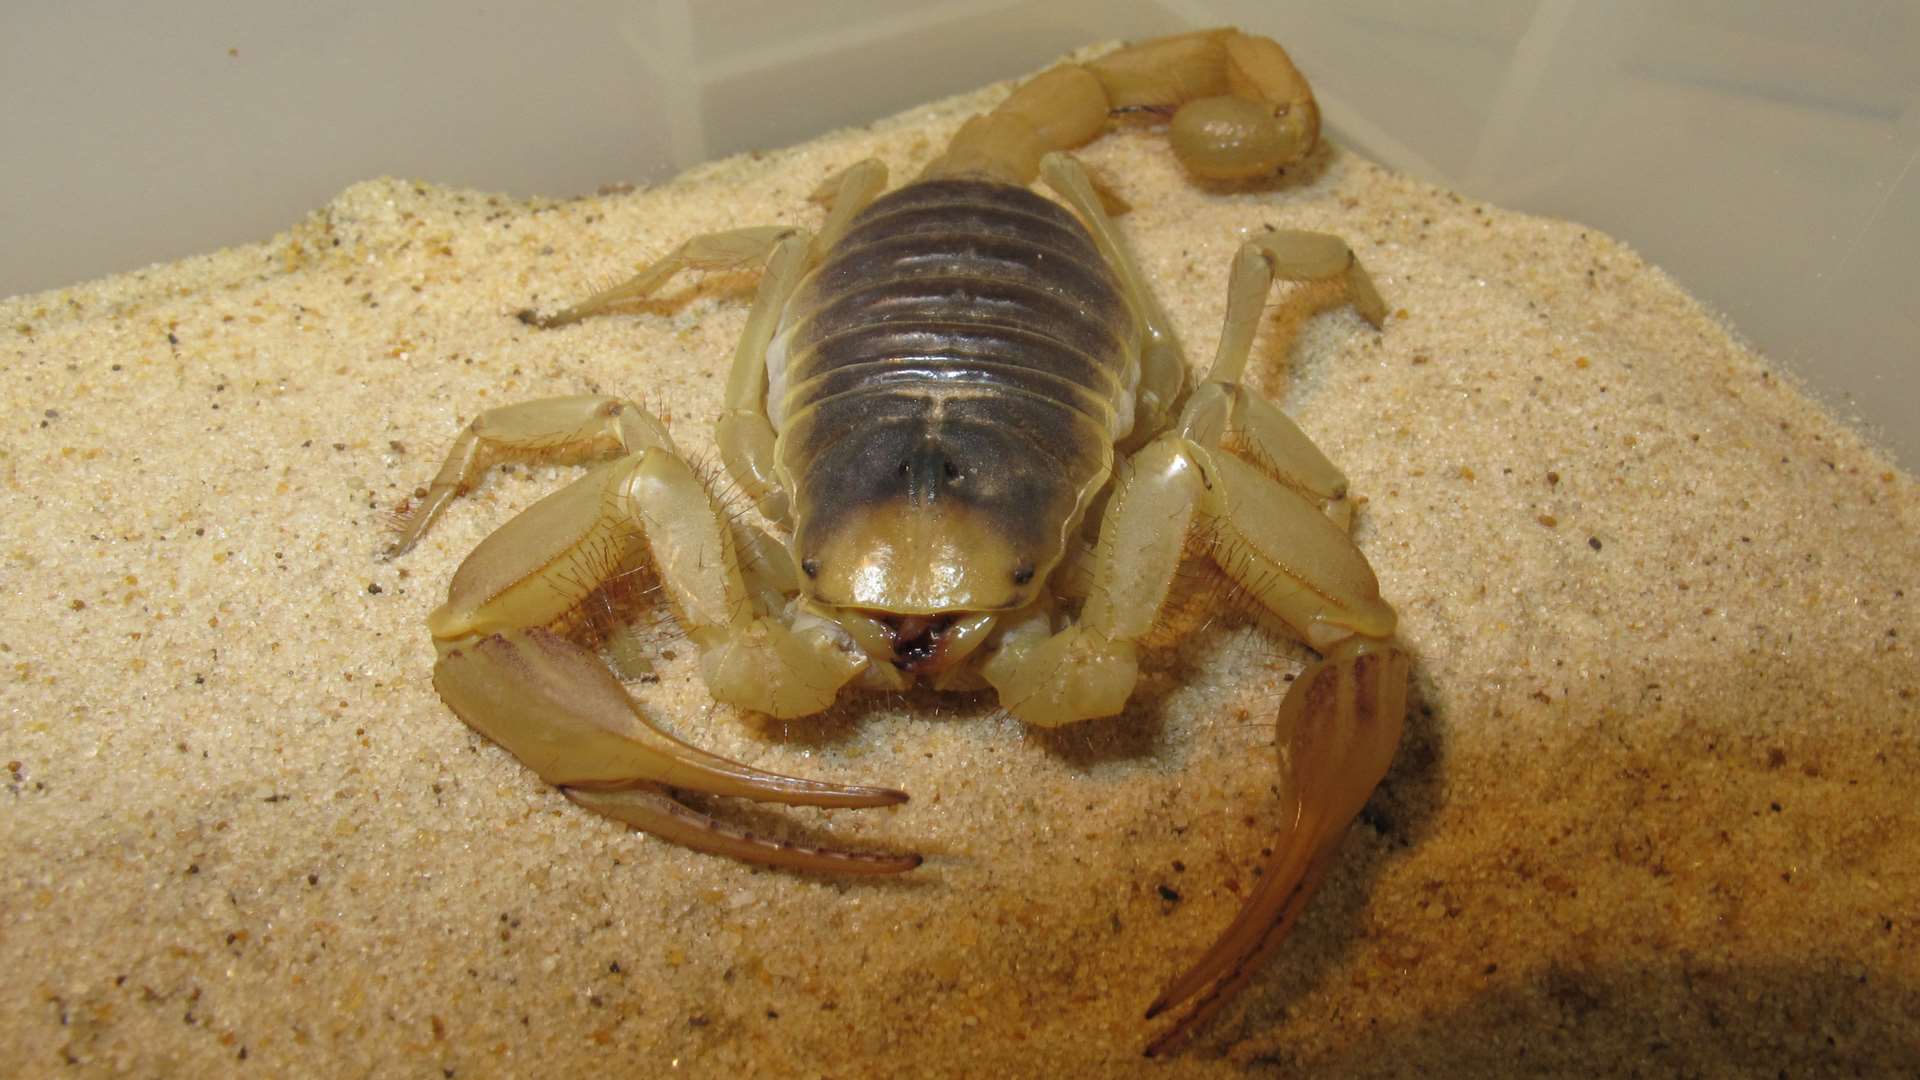 Venomtech sells venom from deadly animals like scorpions to drug research companies